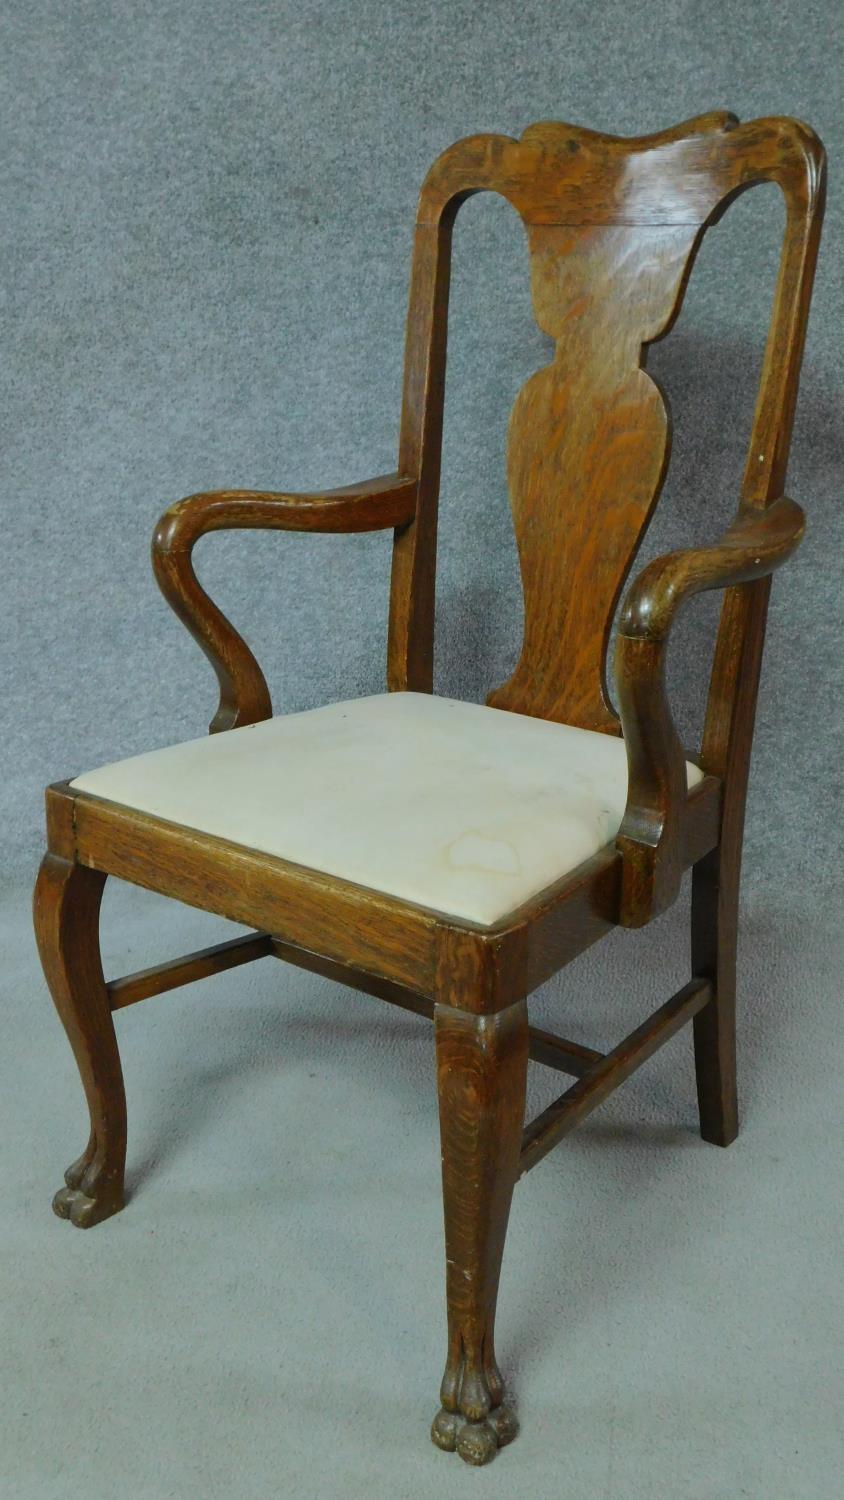 A late 19th century oak early Georgian style armchair with vase splat back and drop in seat raised - Image 2 of 4